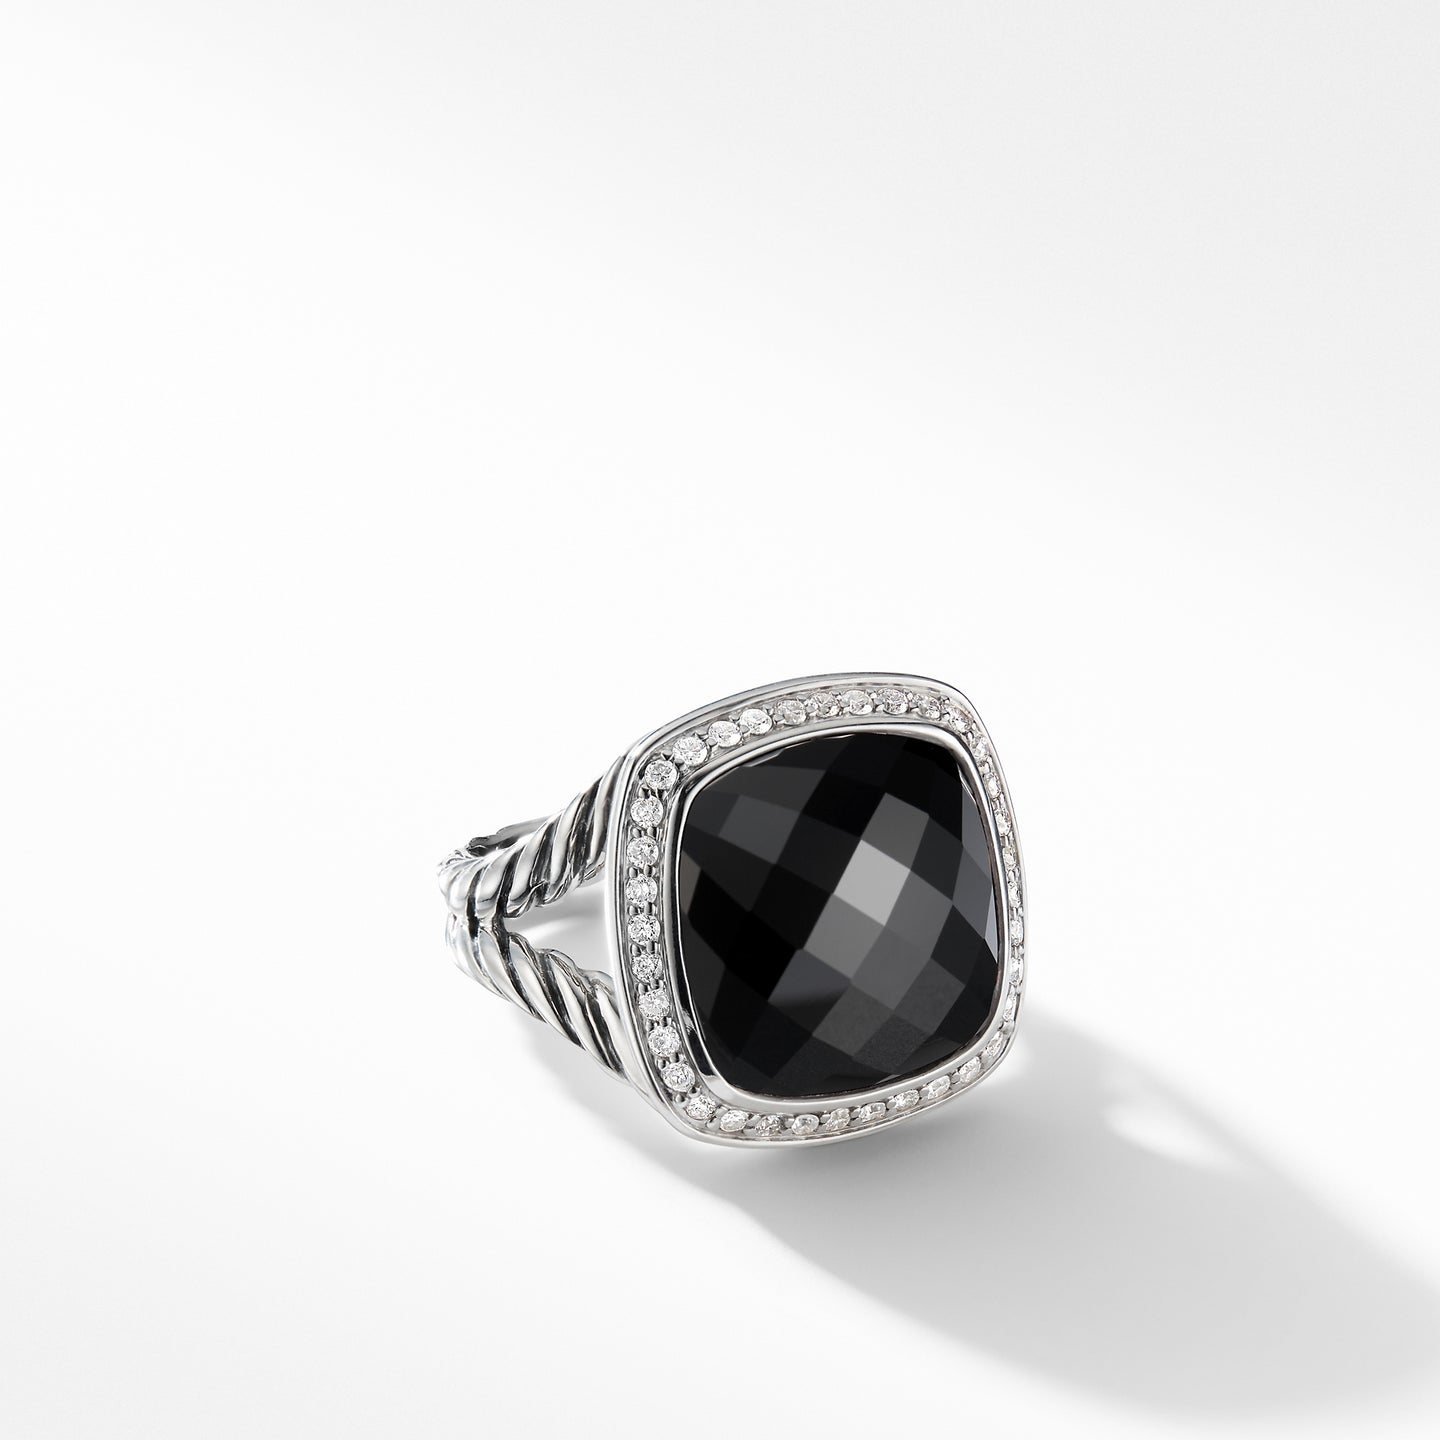 Ring with Black Onyx and Diamonds, Size 6